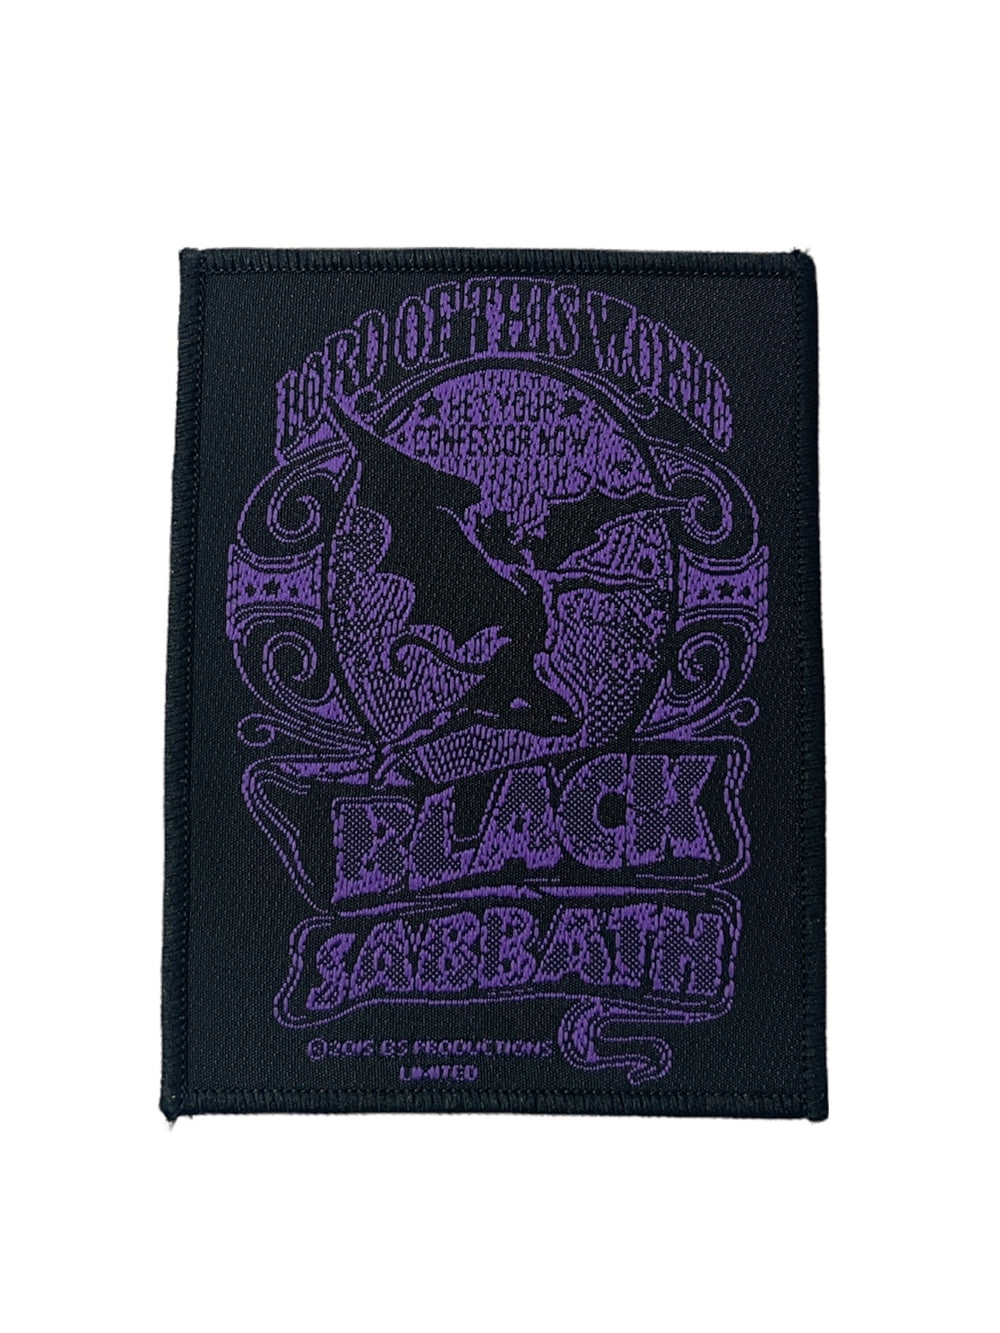 Black Sabbath Standard Patch: Lord Of This World Official Woven Patch Brand New